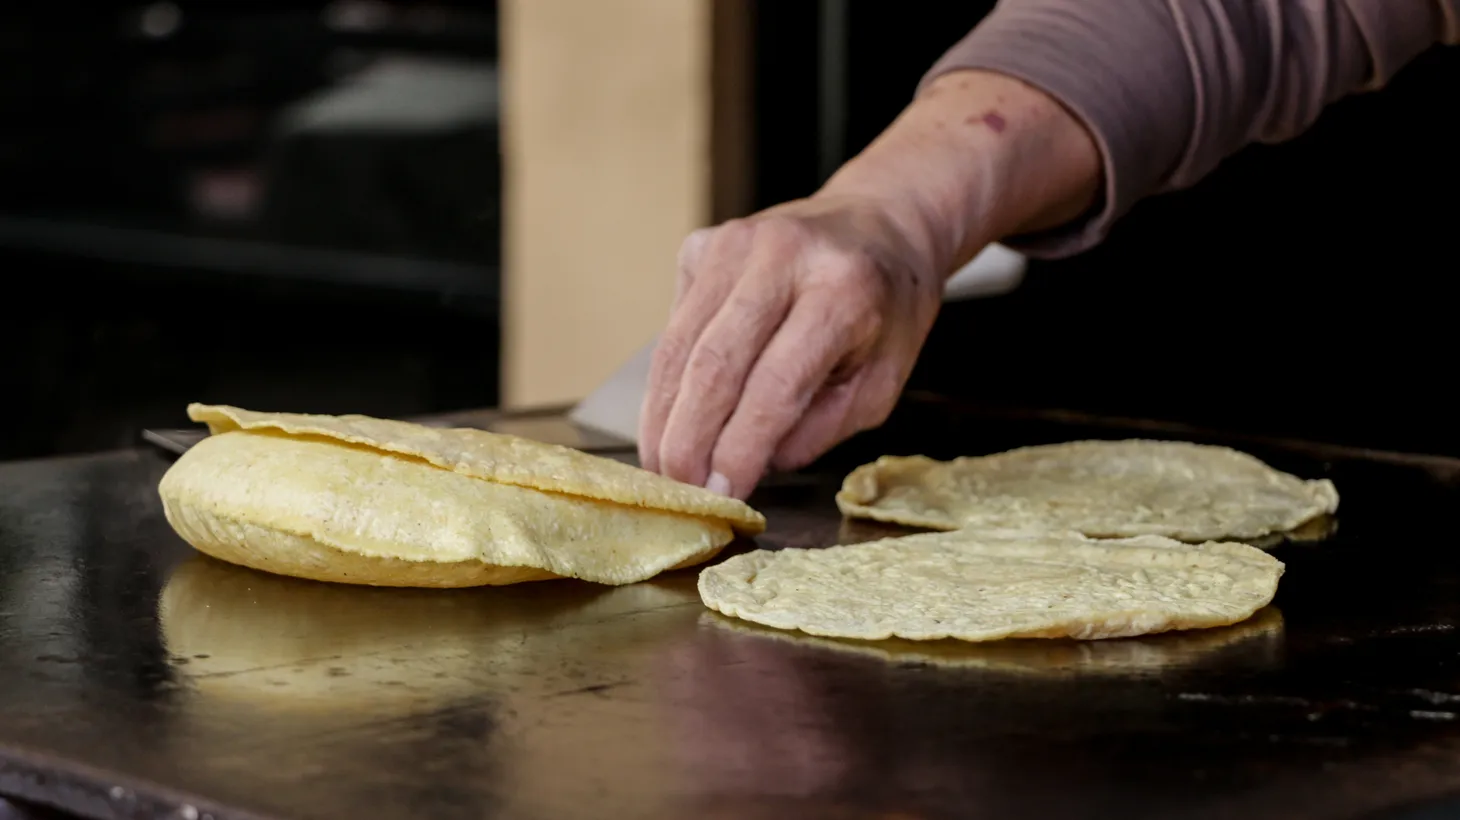 With a corn tortilla, “you’ll notice one side is thicker — that’s the side where you’re supposed to hold — while the other one looks more delicate and where you put in ingredients,” says Gustavo Arellano.